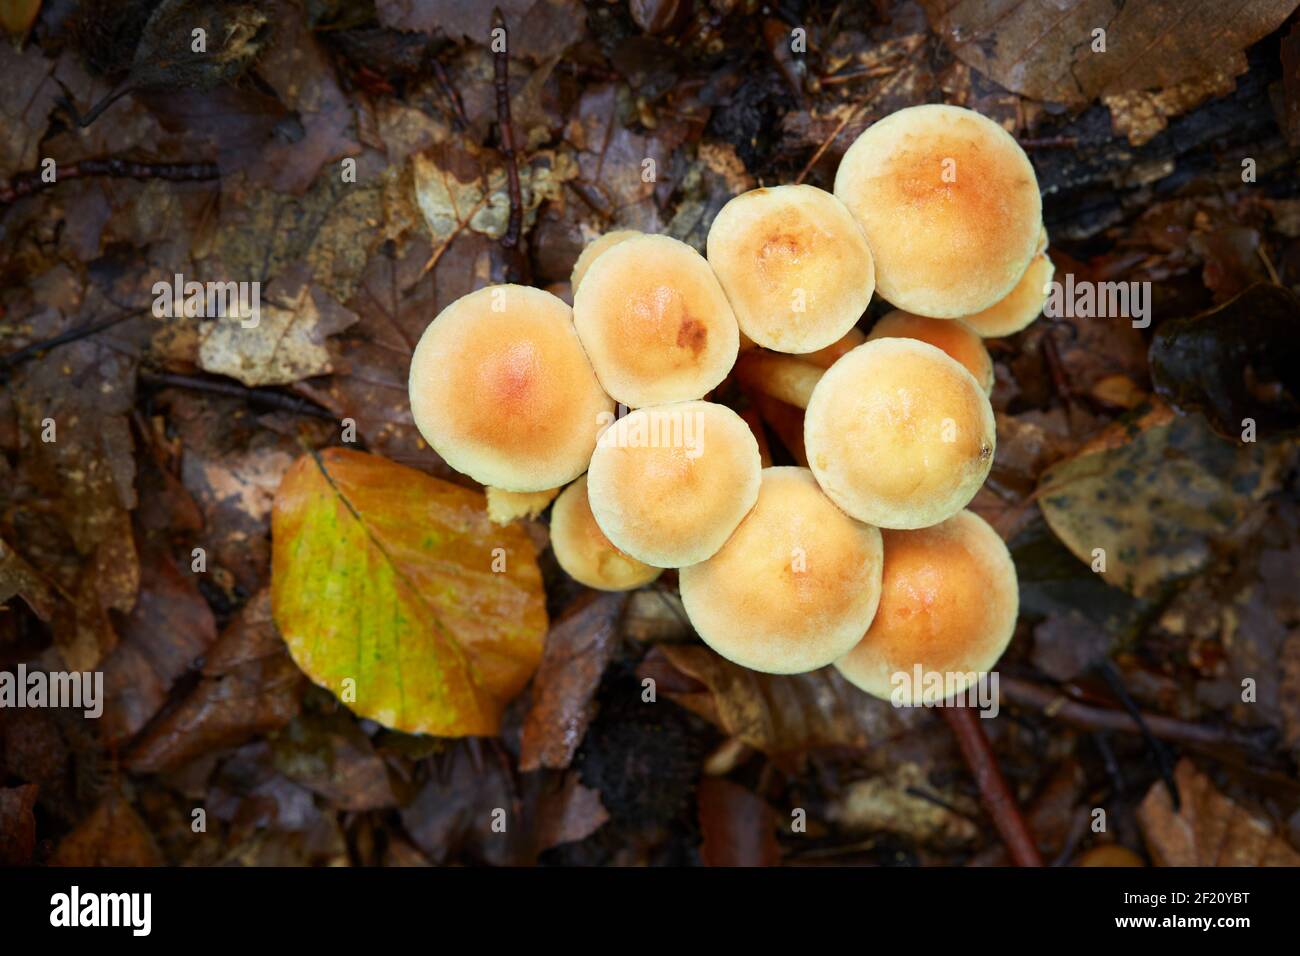 inedible fungus grows in forests, Central Europe, Hypholoma lateritium Stock Photo